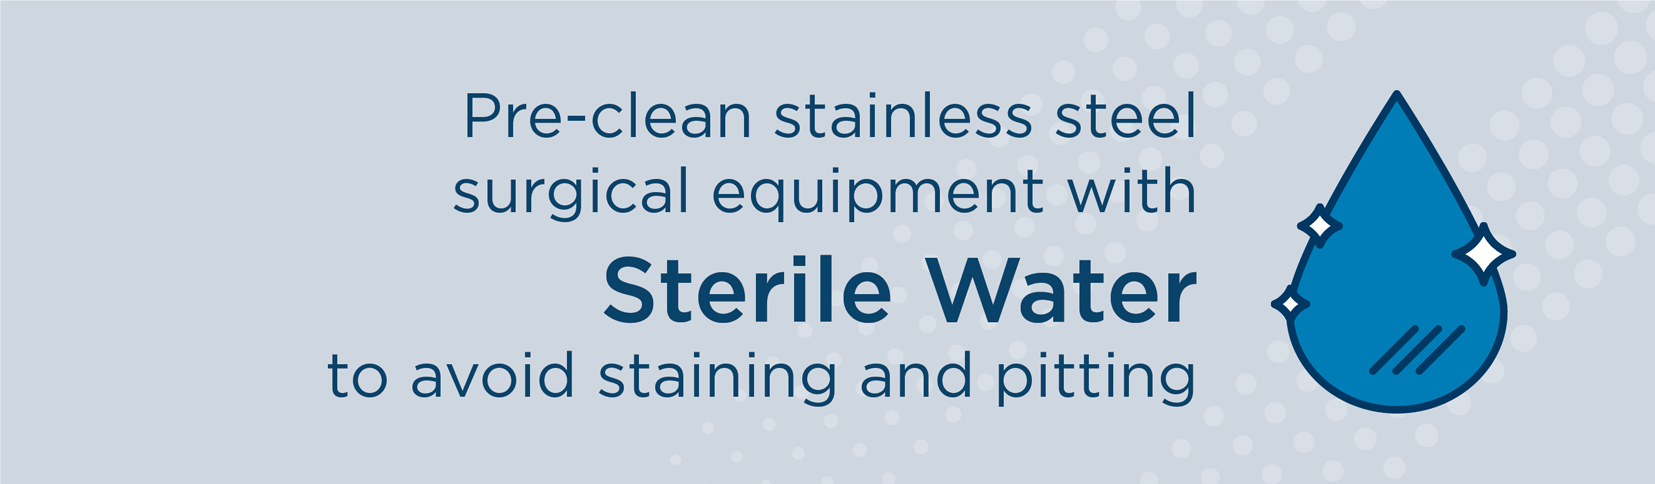 Pre-clean stainless steel surgical equipment with sterile water to avoid staining and pitting.